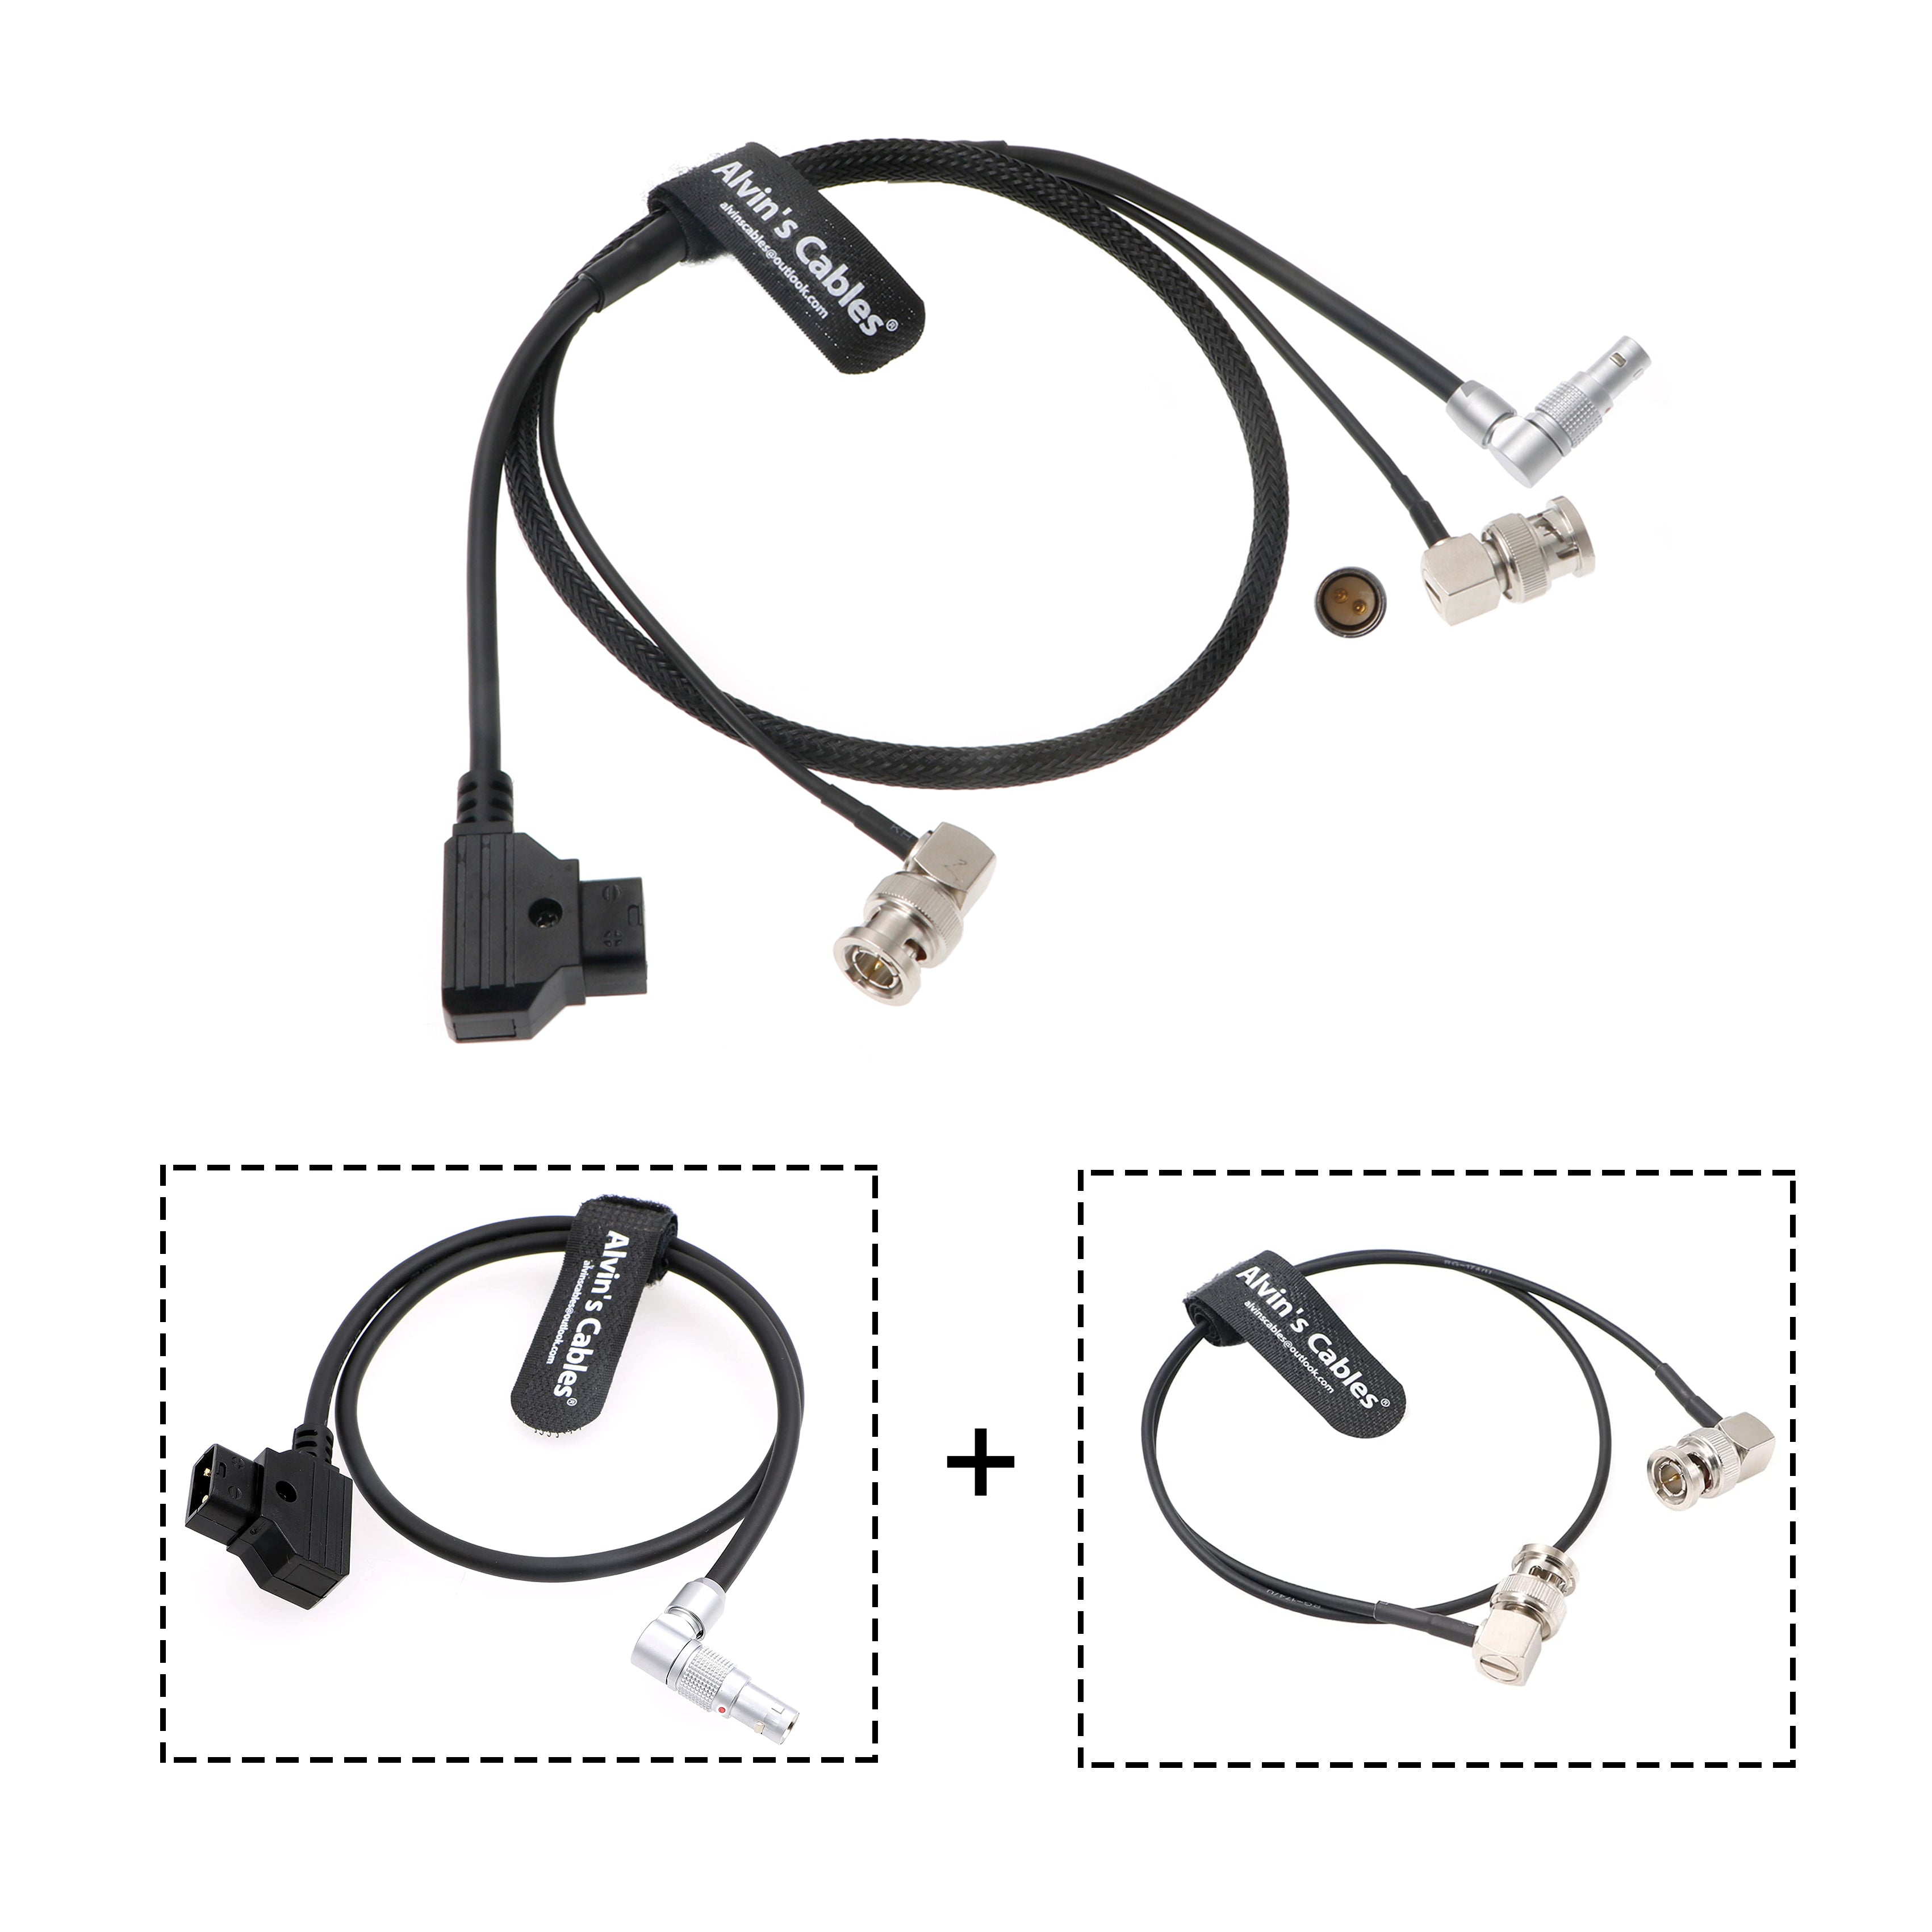 Combination Power-Cable for Zacuto-Gratical-Eye-Viewfinder|Teradek Rotatable Right-Angle 2-Pin-Male to D-Tap + Right Angle BNC to BNC Flexible HD SDI Cable for BMCC-Video-Camera Braided